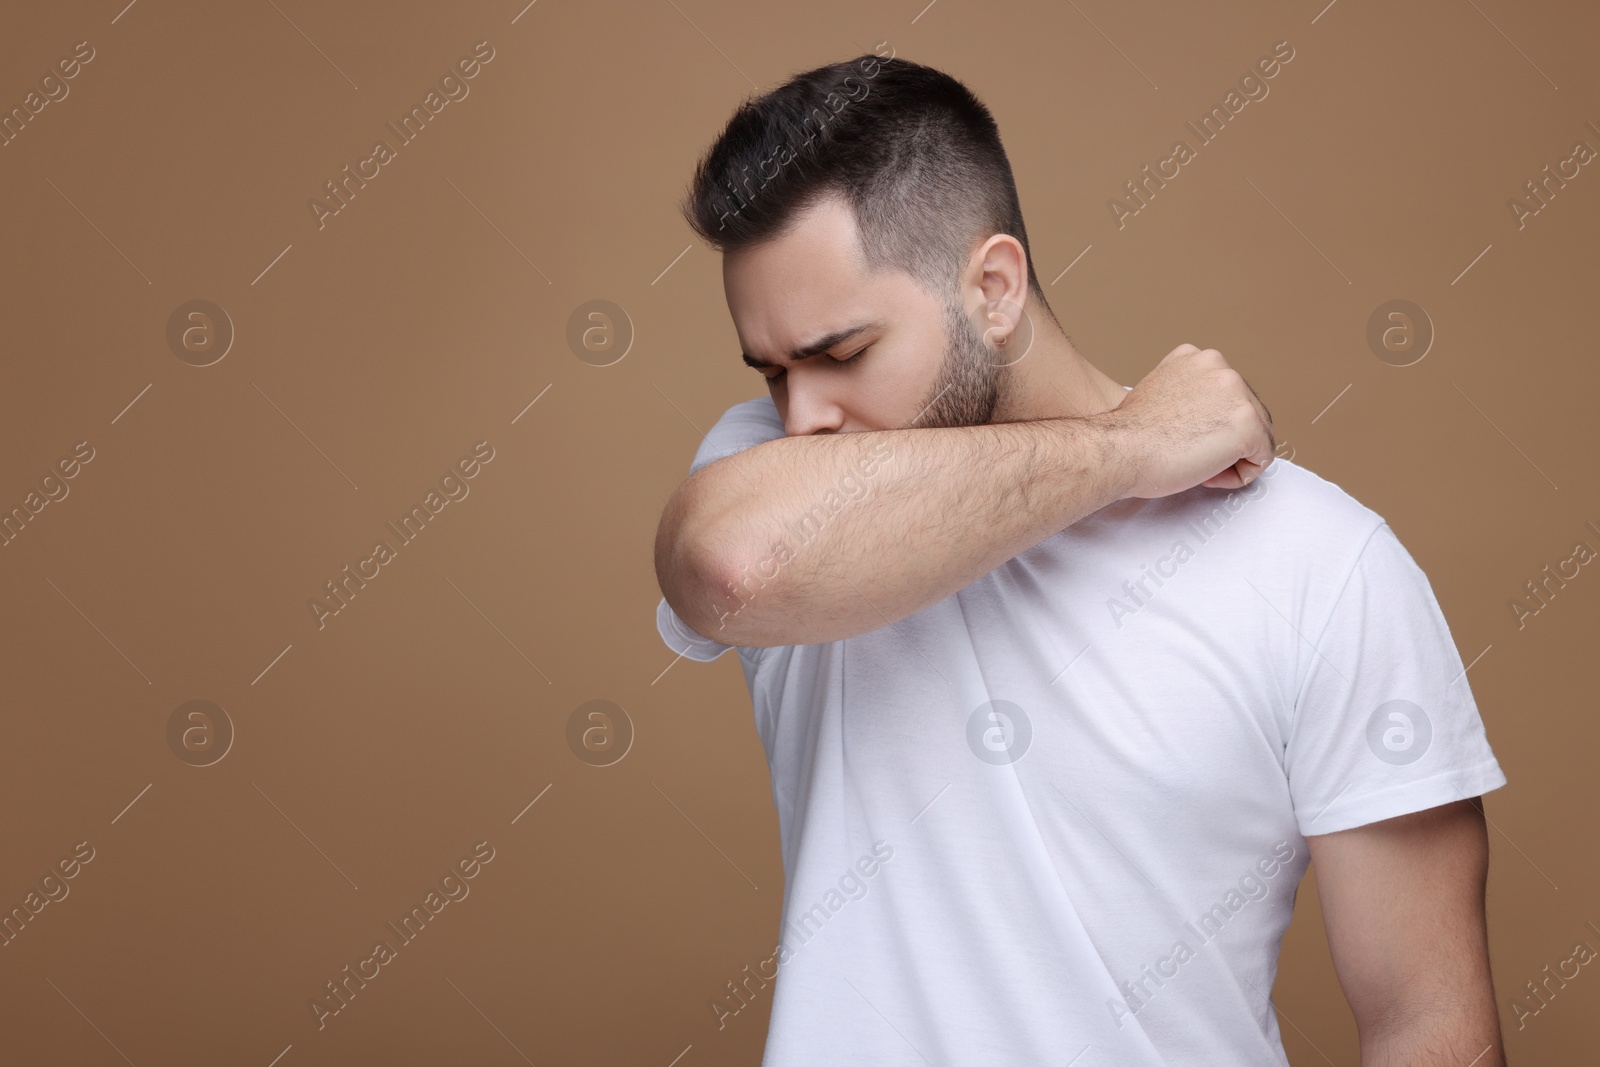 Photo of Sick man coughing on brown background, space for text